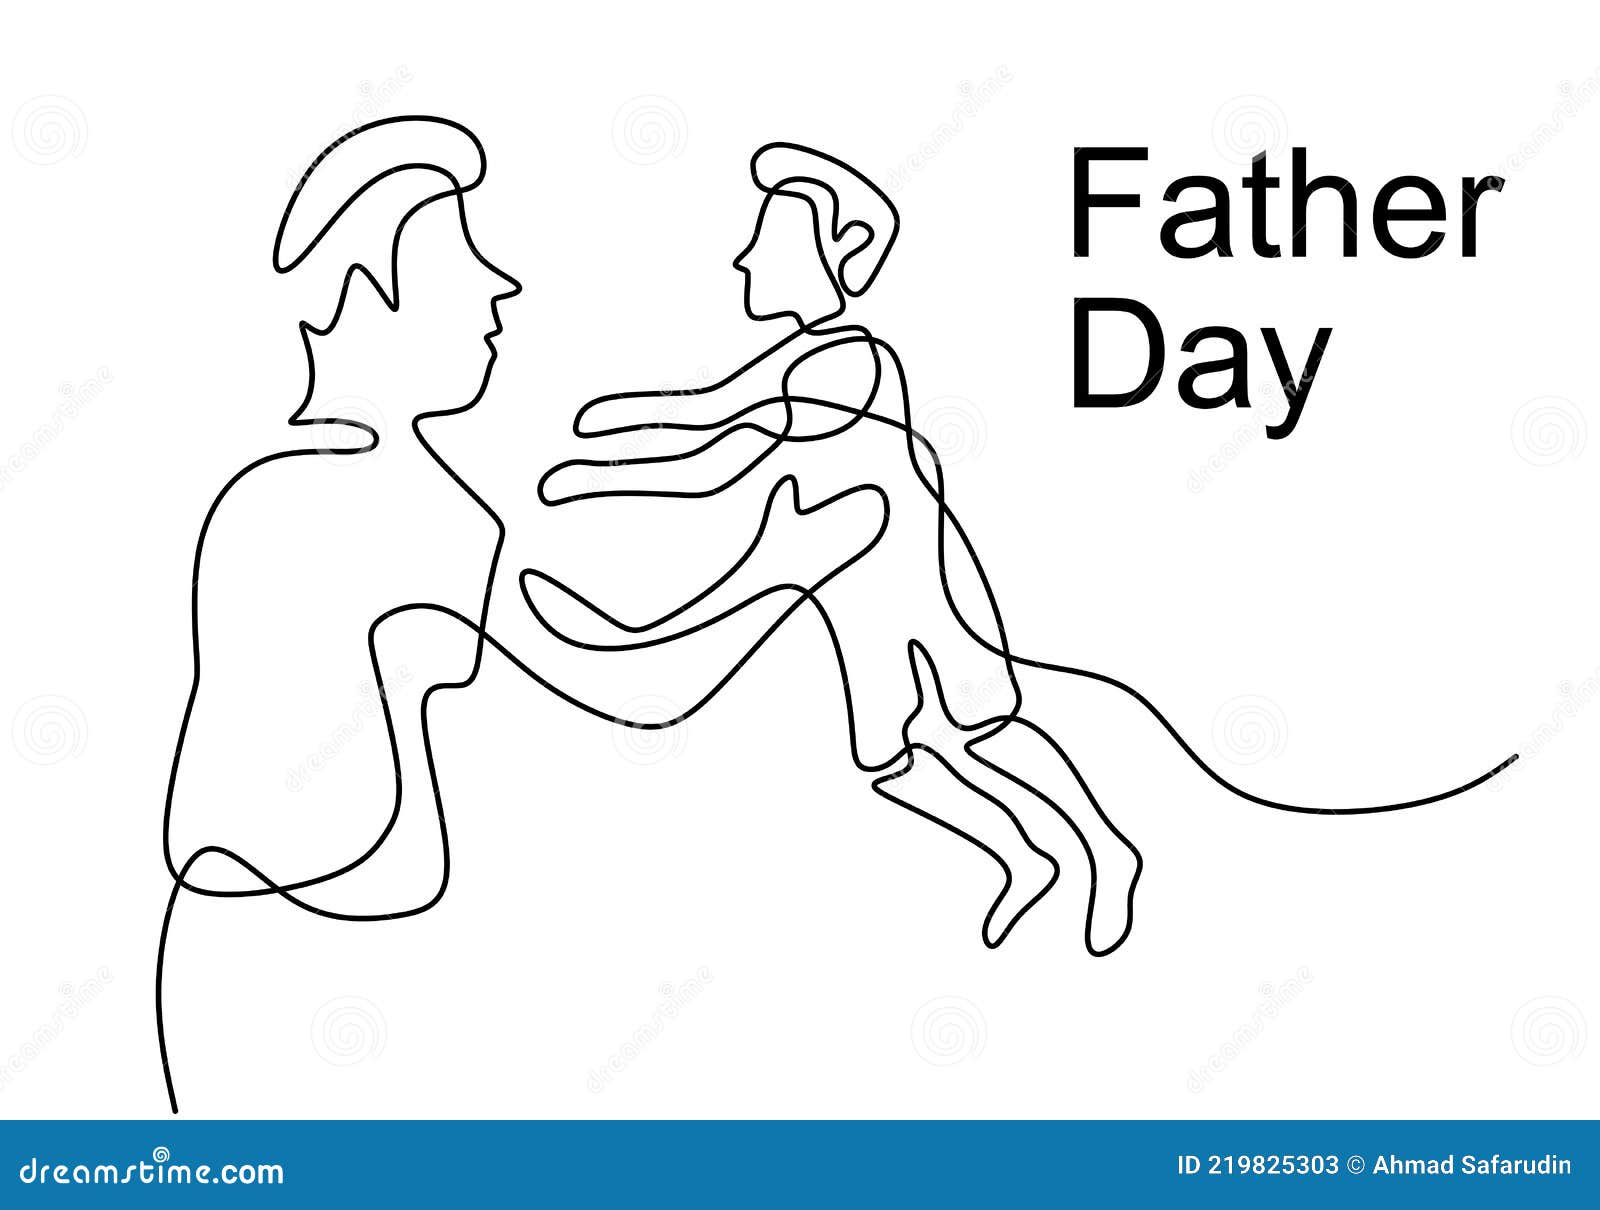 Photo Print: Customized Drawing on Father's Day-saigonsouth.com.vn